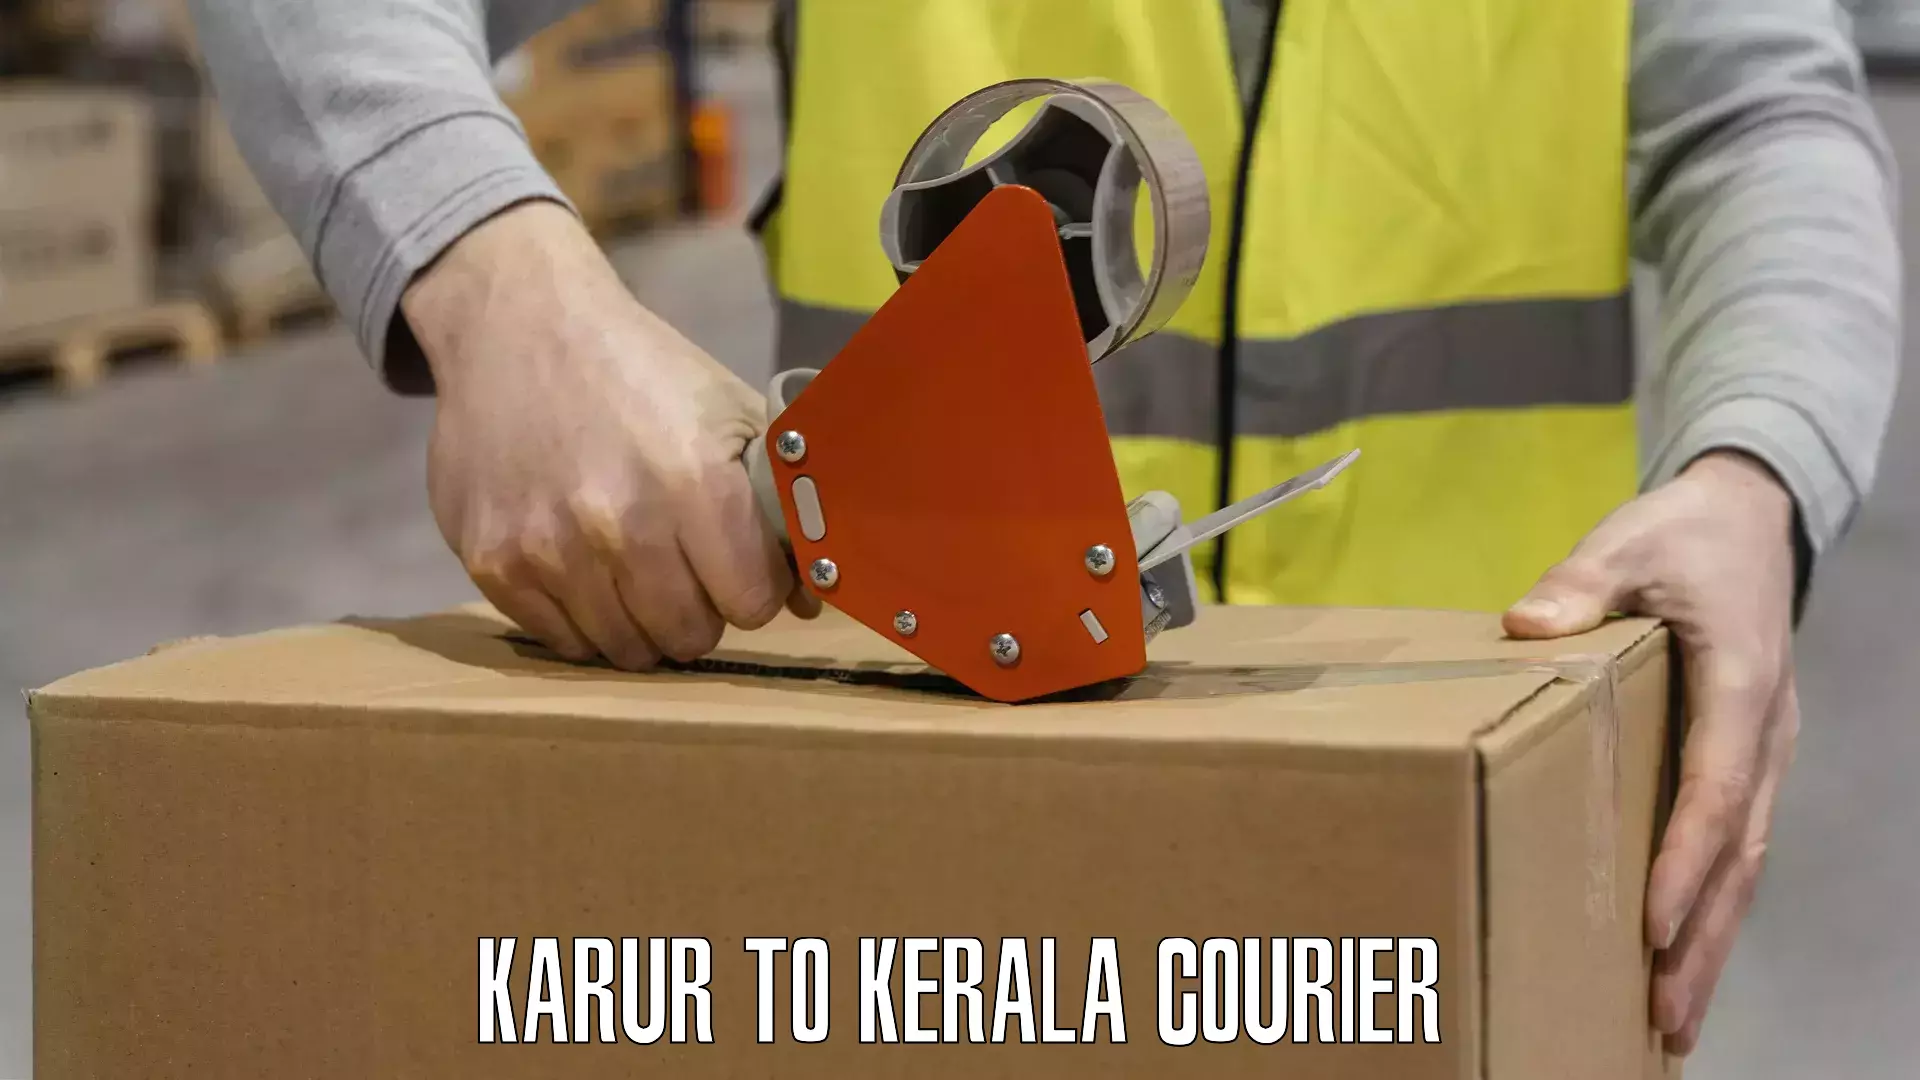 Reliable delivery network Karur to Cochin